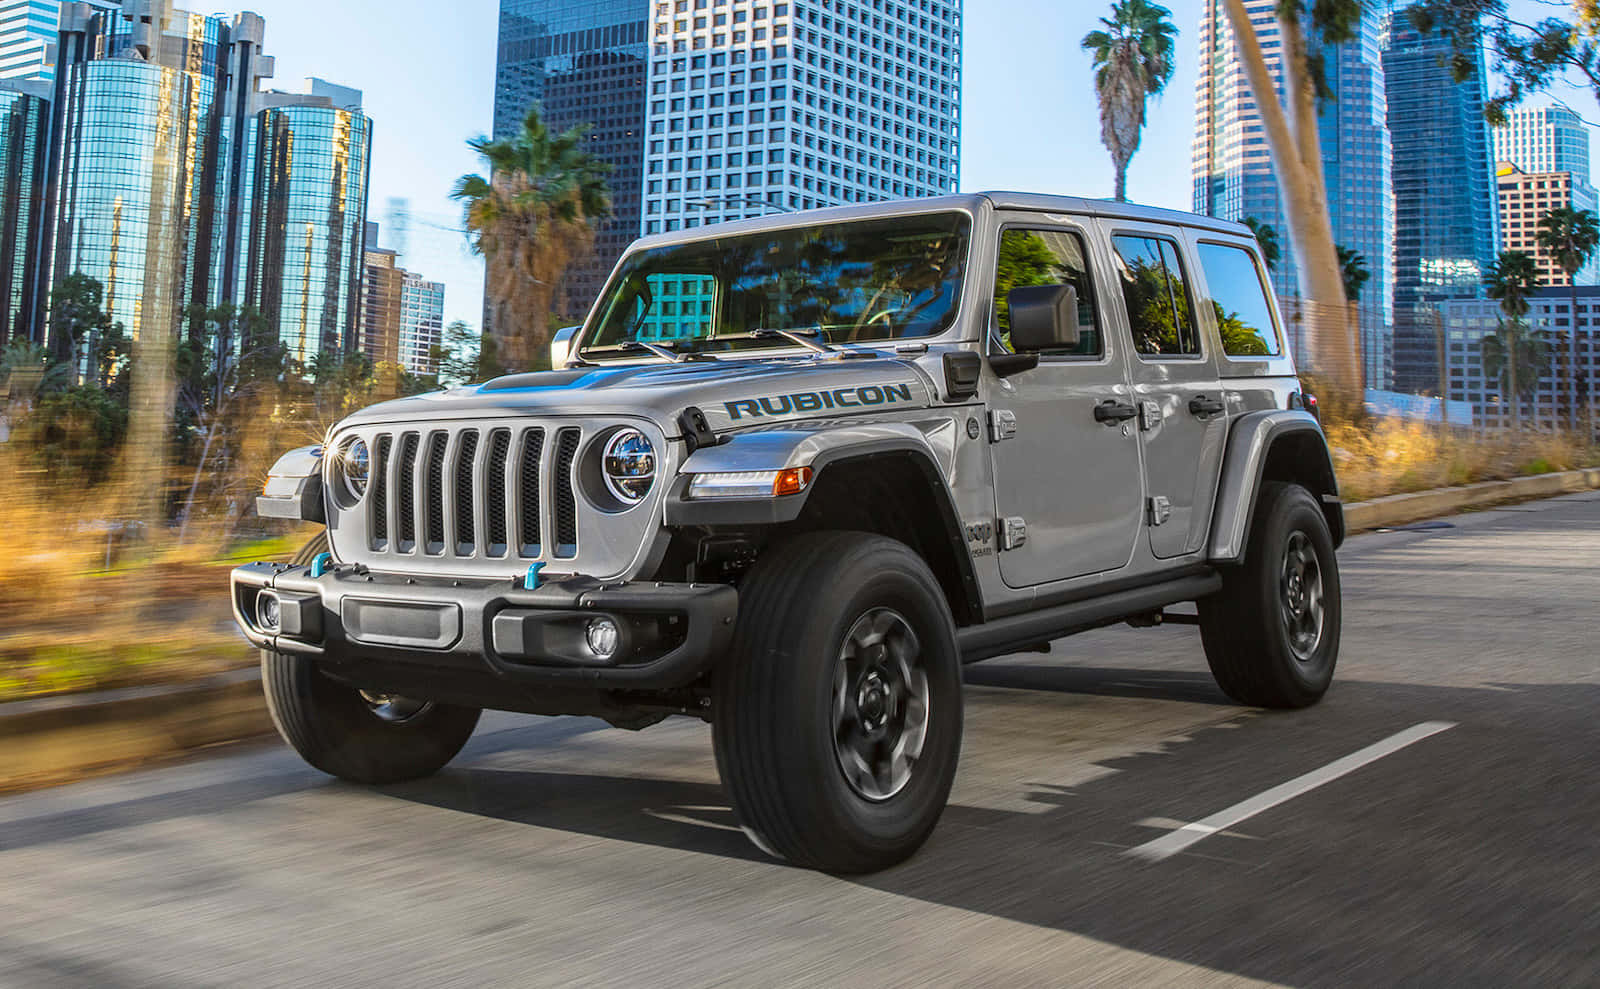 The 2020 Jeep Wrangler Is Driving Down A City Street